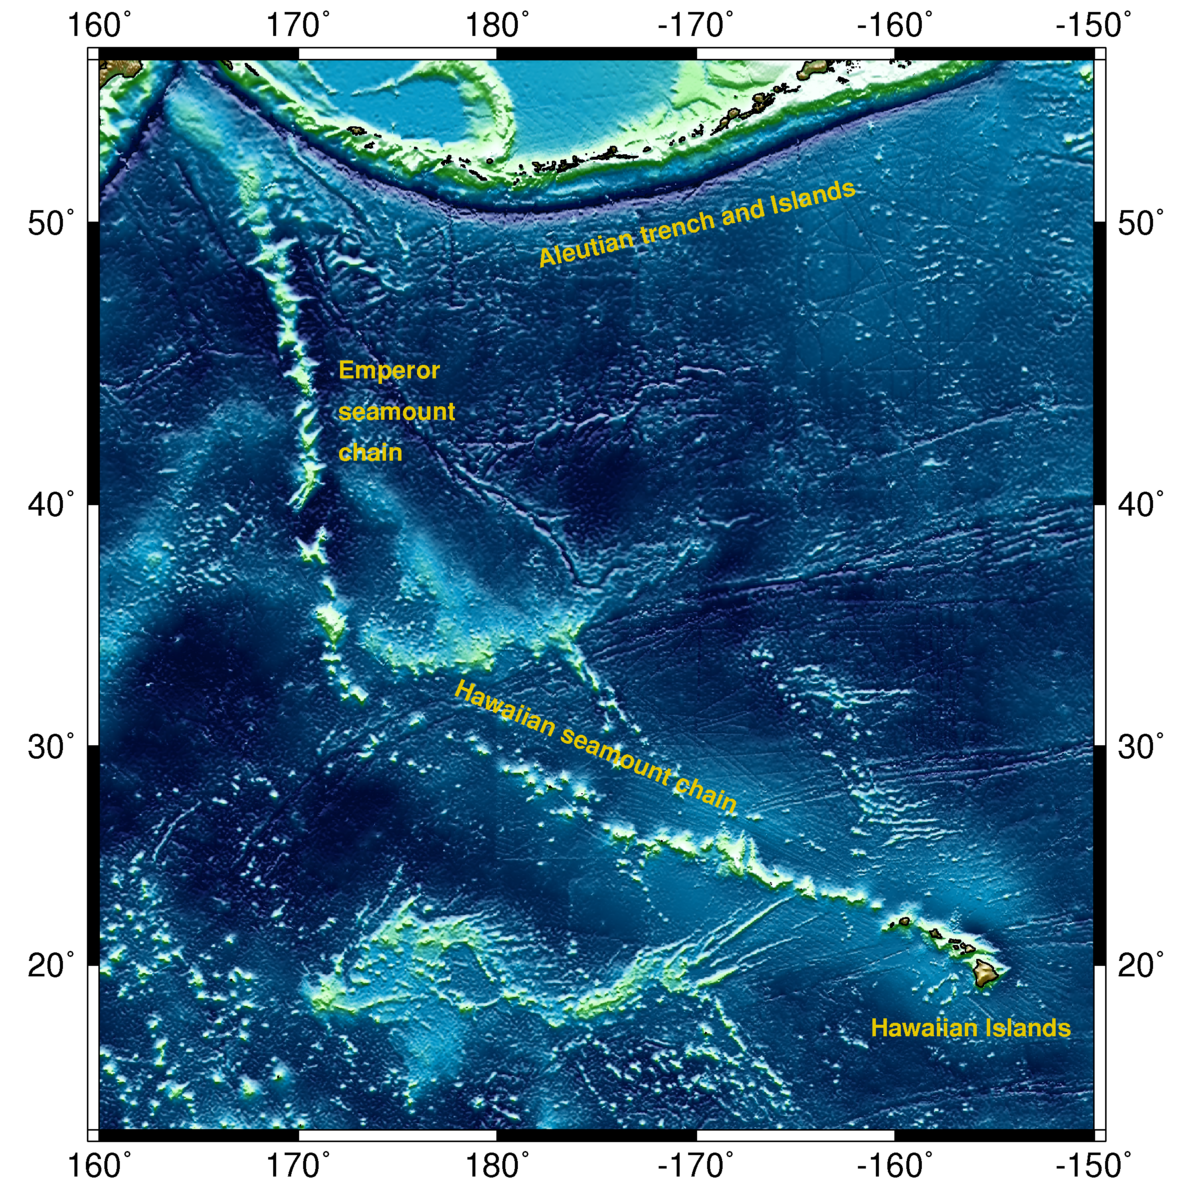 Map of the Hawaii-Emperor seamount chain and seafloor topography. The Aleutian trench and islands run approximately east-to-west along the top of the map, the Emperor seamount chain runs approximately north-to-south near the left-hand side of the map, and the Hawaiian seamount chain runs approximately west-northwest-to-east-southeast near the bottom of the map.